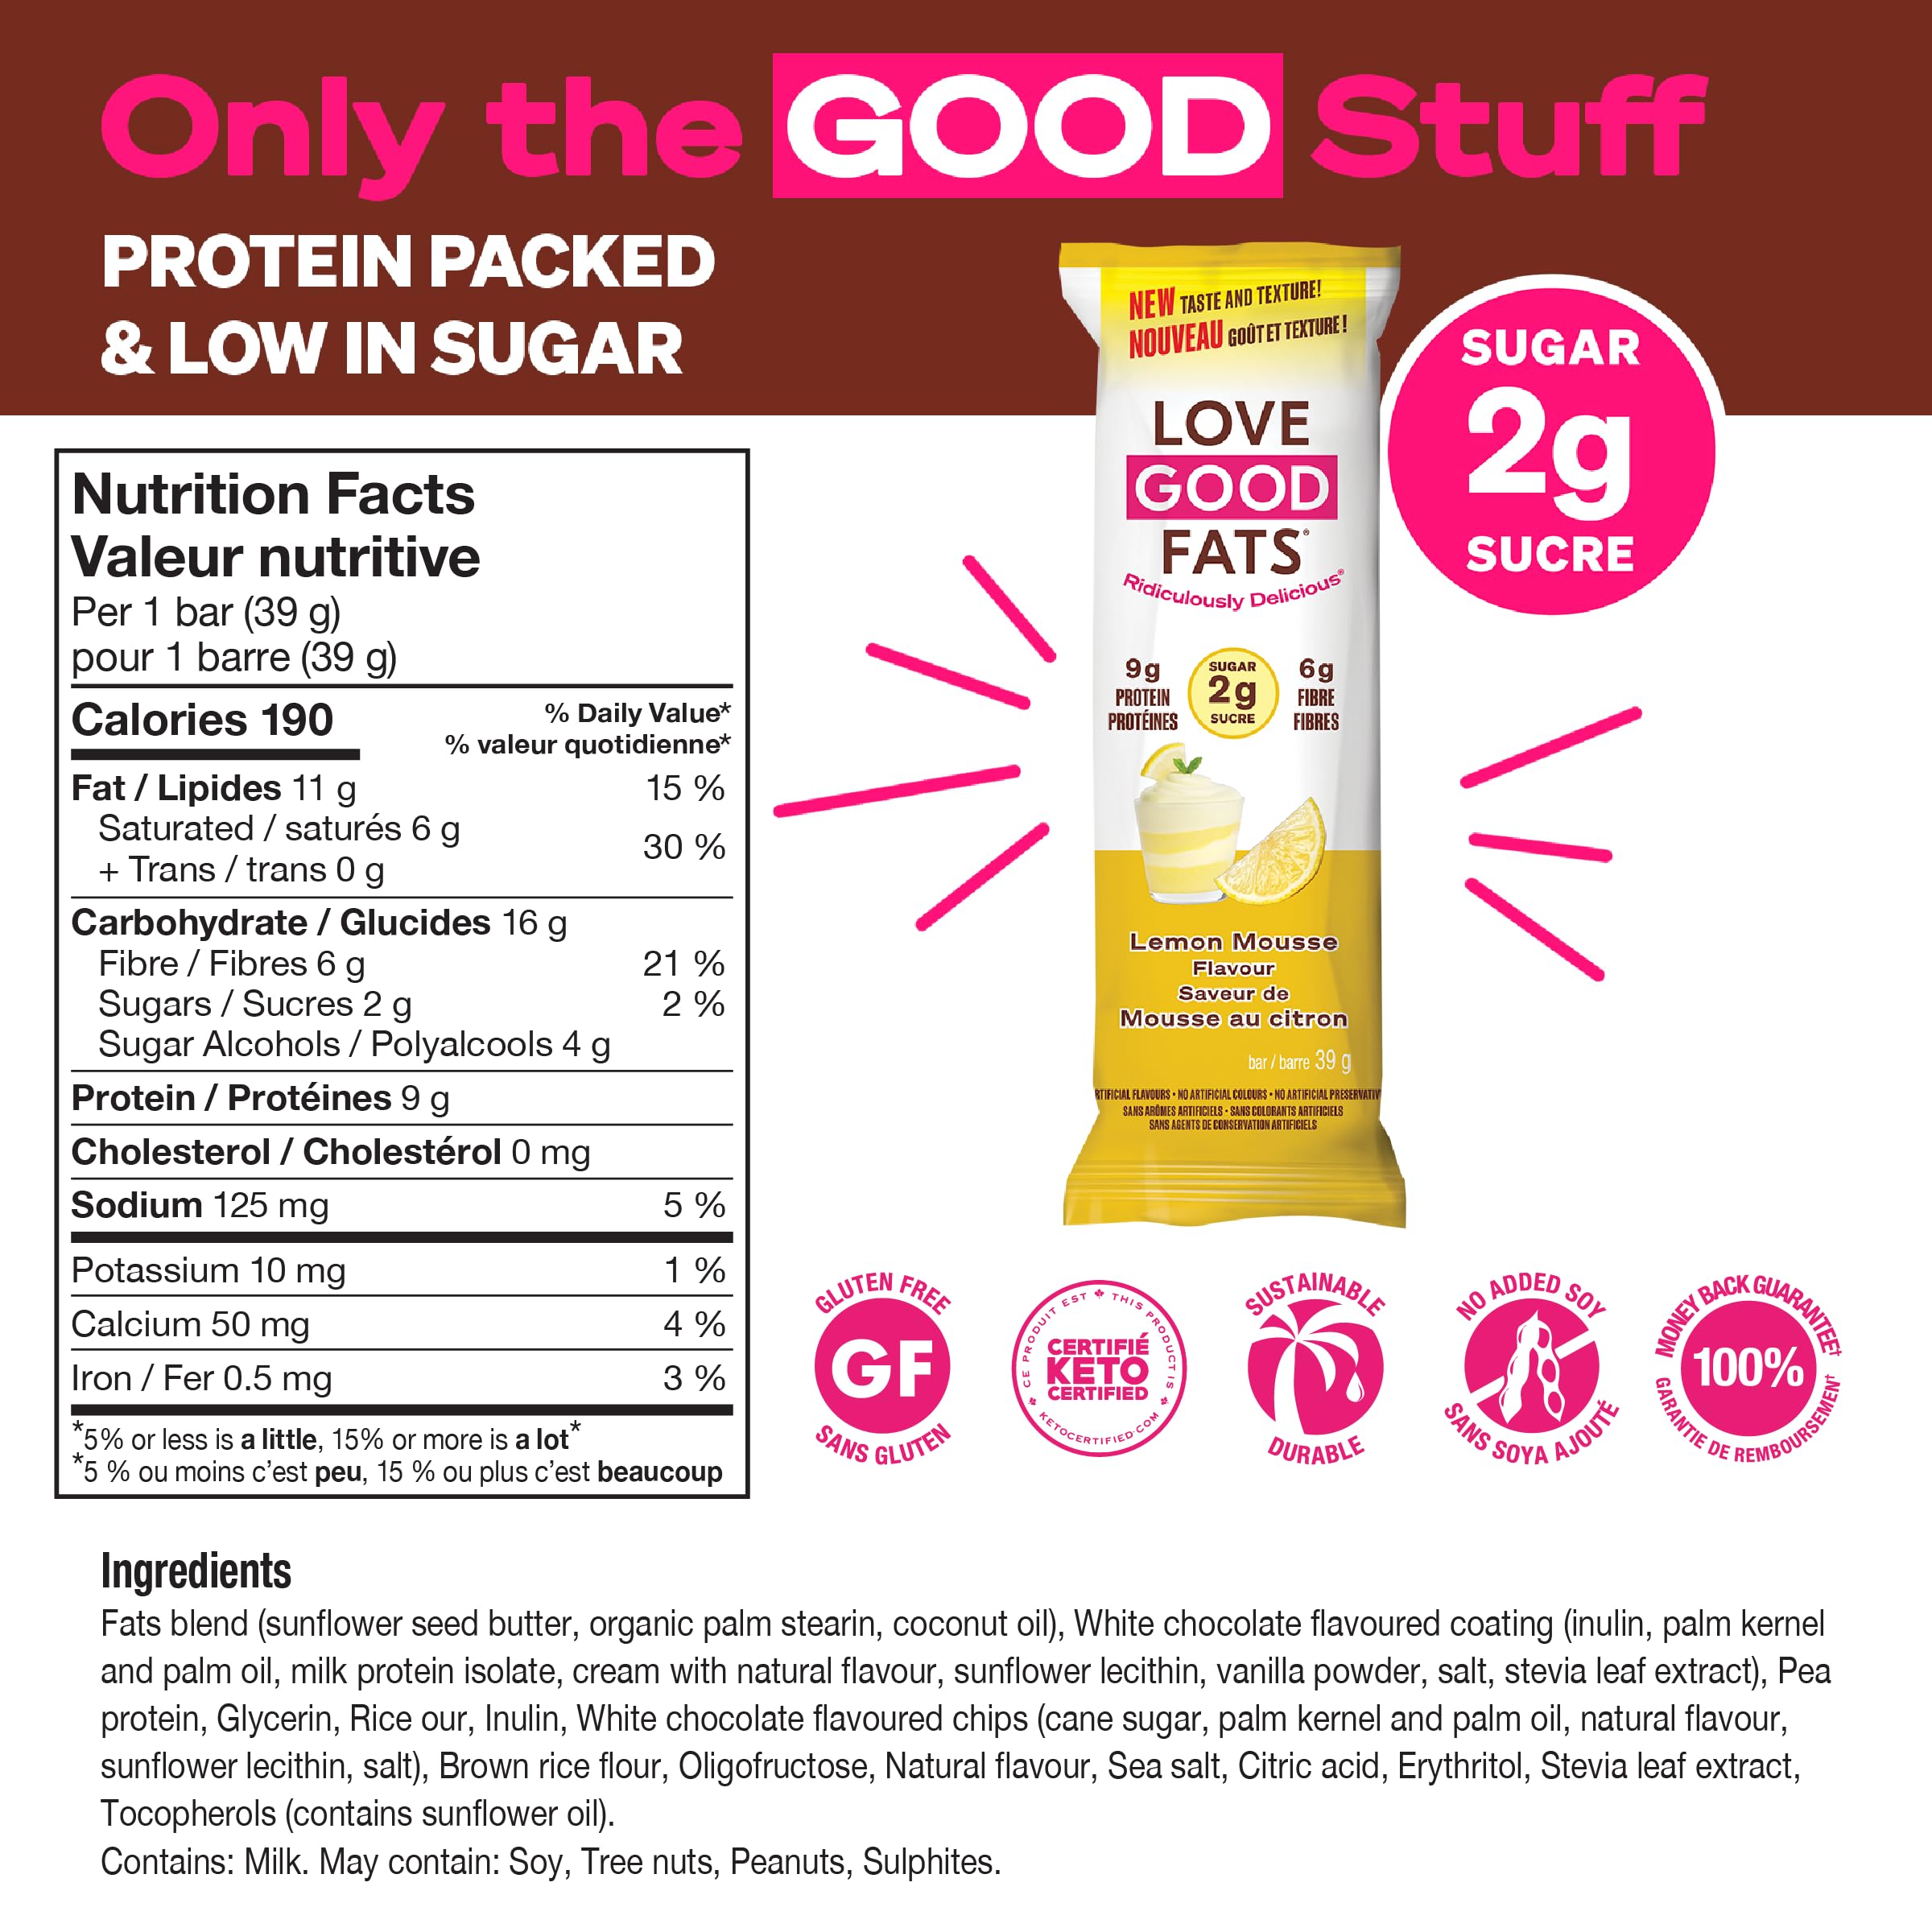 Love Good Fats Keto Protein Bars Truffle Combo - Protein Snack, Low Carb, Low Sugar, Gluten Free, Non GMO, 4 packs of 12 bars